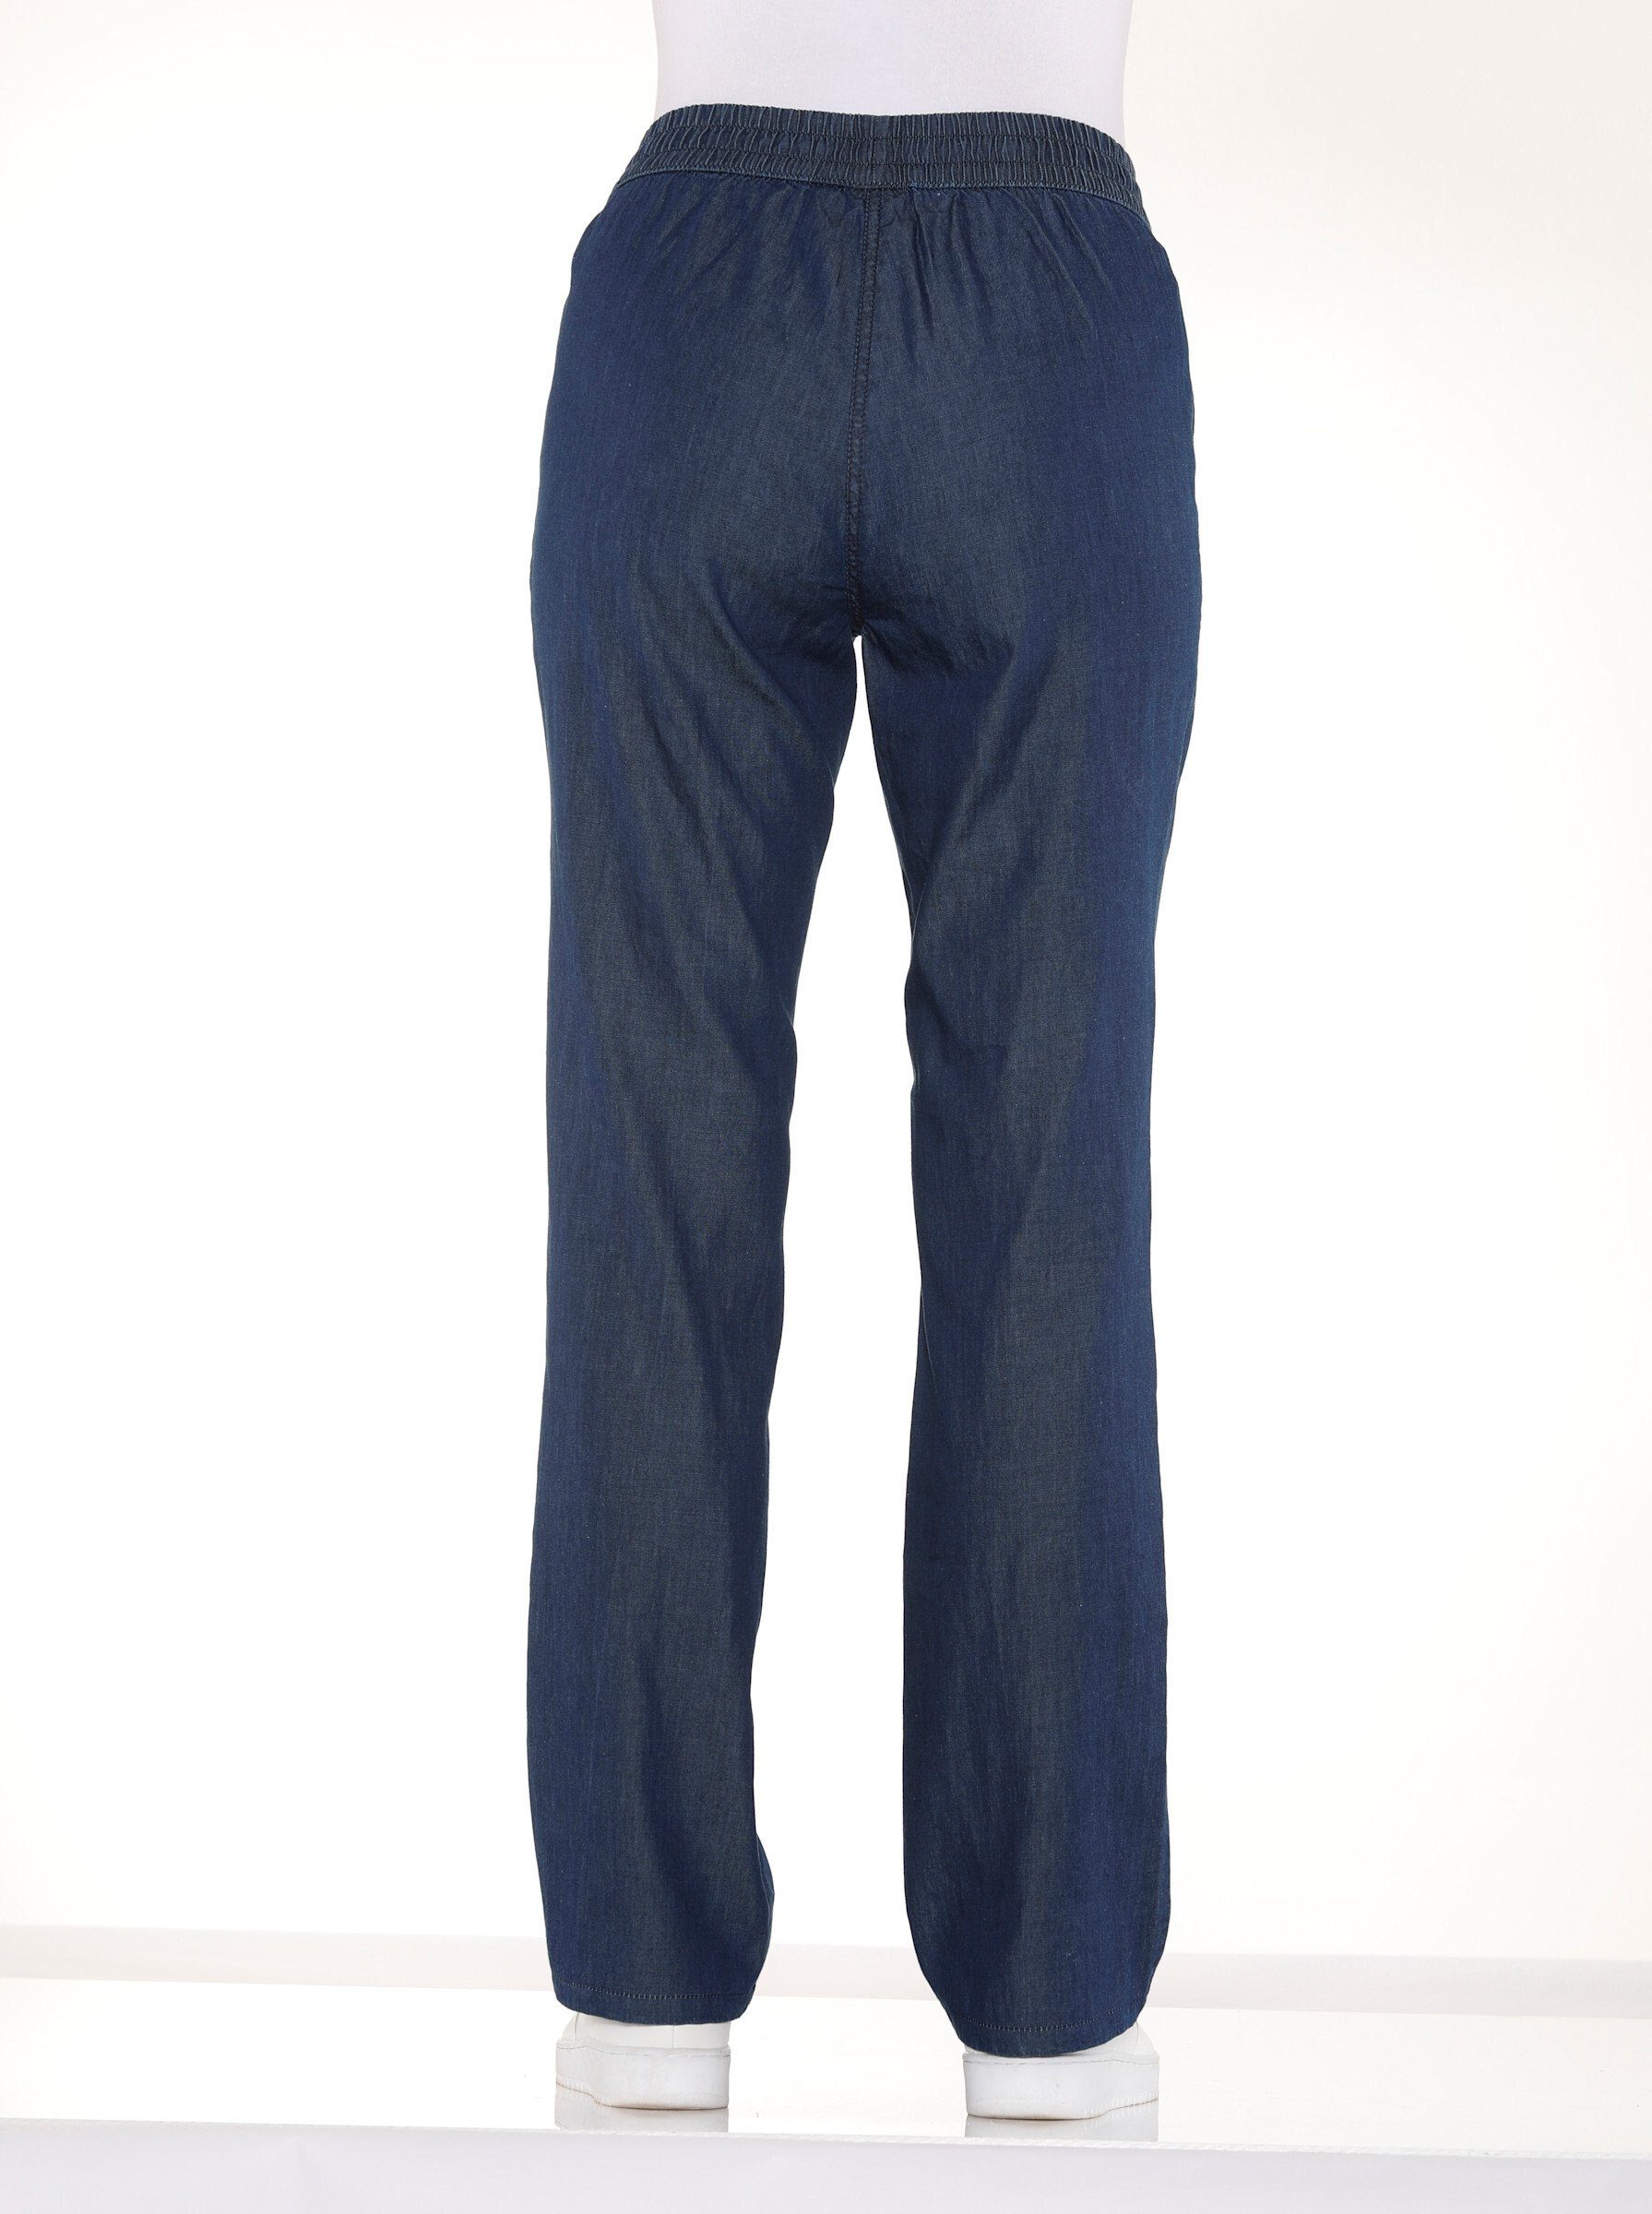 Sieh an! Bequeme blue-stone-washed Jeans